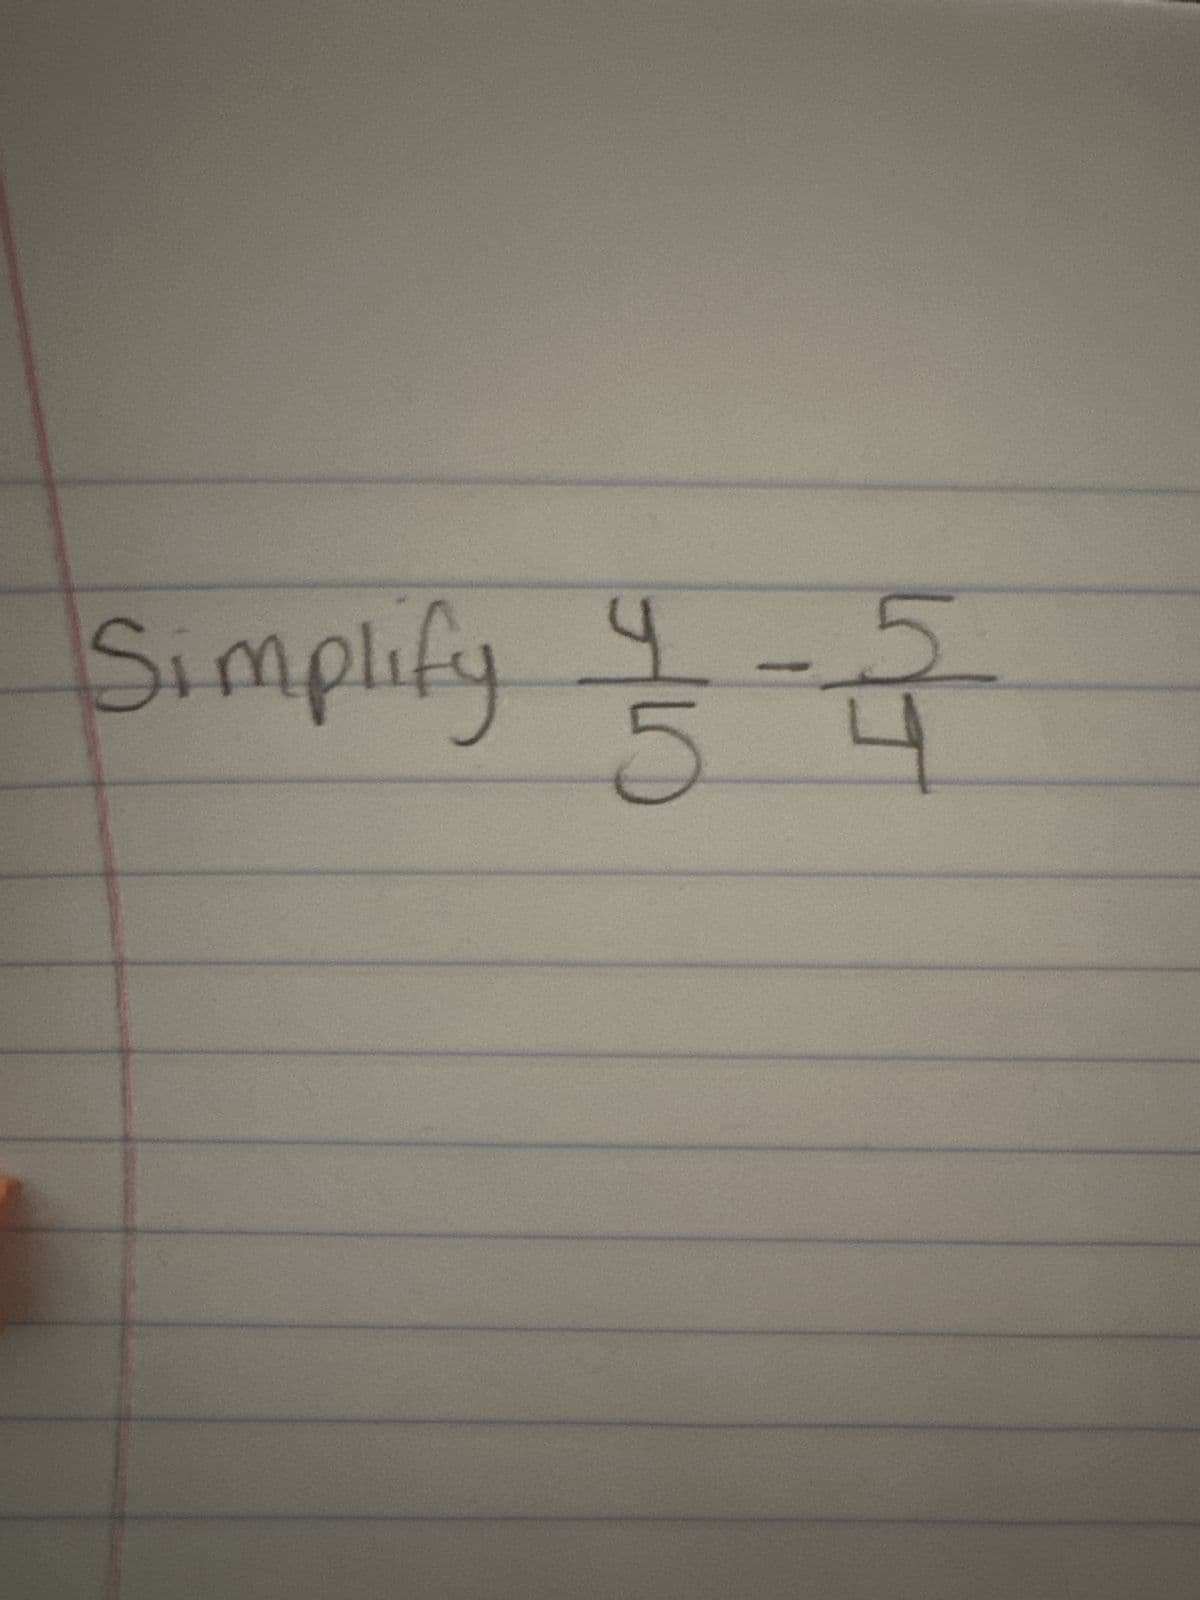 **Simplifying Fractions**

**Problem:**
Simplify the expression \( \frac{4}{5} - \frac{5}{4} \)

**Solution Steps:**
1. **Find the common denominator:** To subtract fractions, they must have a common denominator. The denominators of \( \frac{4}{5} \) and \( \frac{5}{4} \) are 5 and 4, respectively. The least common denominator (LCD) for these fractions is 20.

2. **Convert each fraction to the common denominator:**
 
   - For \( \frac{4}{5} \):
     - Numerator \( = 4 \times 4 = 16 \)
     - Denominator \( = 5 \times 4 = 20 \)
     - So, \( \frac{4}{5} = \frac{16}{20} \)

   - For \( \frac{5}{4} \):
     - Numerator \( = 5 \times 5 = 25 \)
     - Denominator \( = 4 \times 5 = 20 \)
     - So, \( \frac{5}{4} = \frac{25}{20} \)

3. **Subtract the converted fractions:**
   - \( \frac{16}{20} - \frac{25}{20} \)
   - Since the denominators are now the same, subtract the numerators:
     - \( 16 - 25 \)
   - Result: \( \frac{-9}{20} \)

Therefore, the simplified form of \( \frac{4}{5} - \frac{5}{4} \) is:
\[ \frac{-9}{20} \]